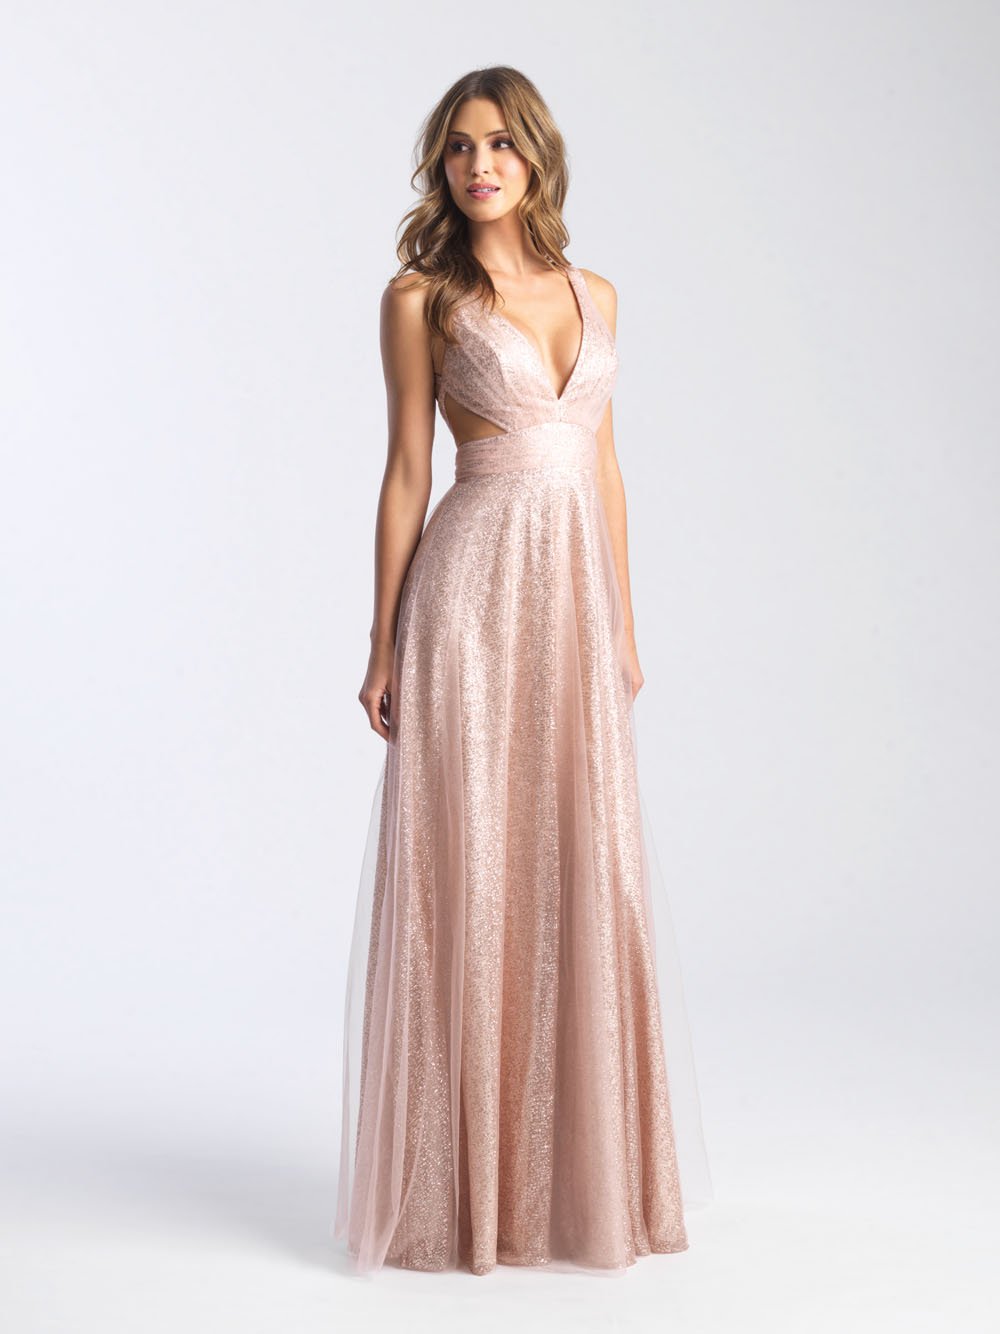 Madison James 20-382 dress images in these colors: Navy, Rose Gold.